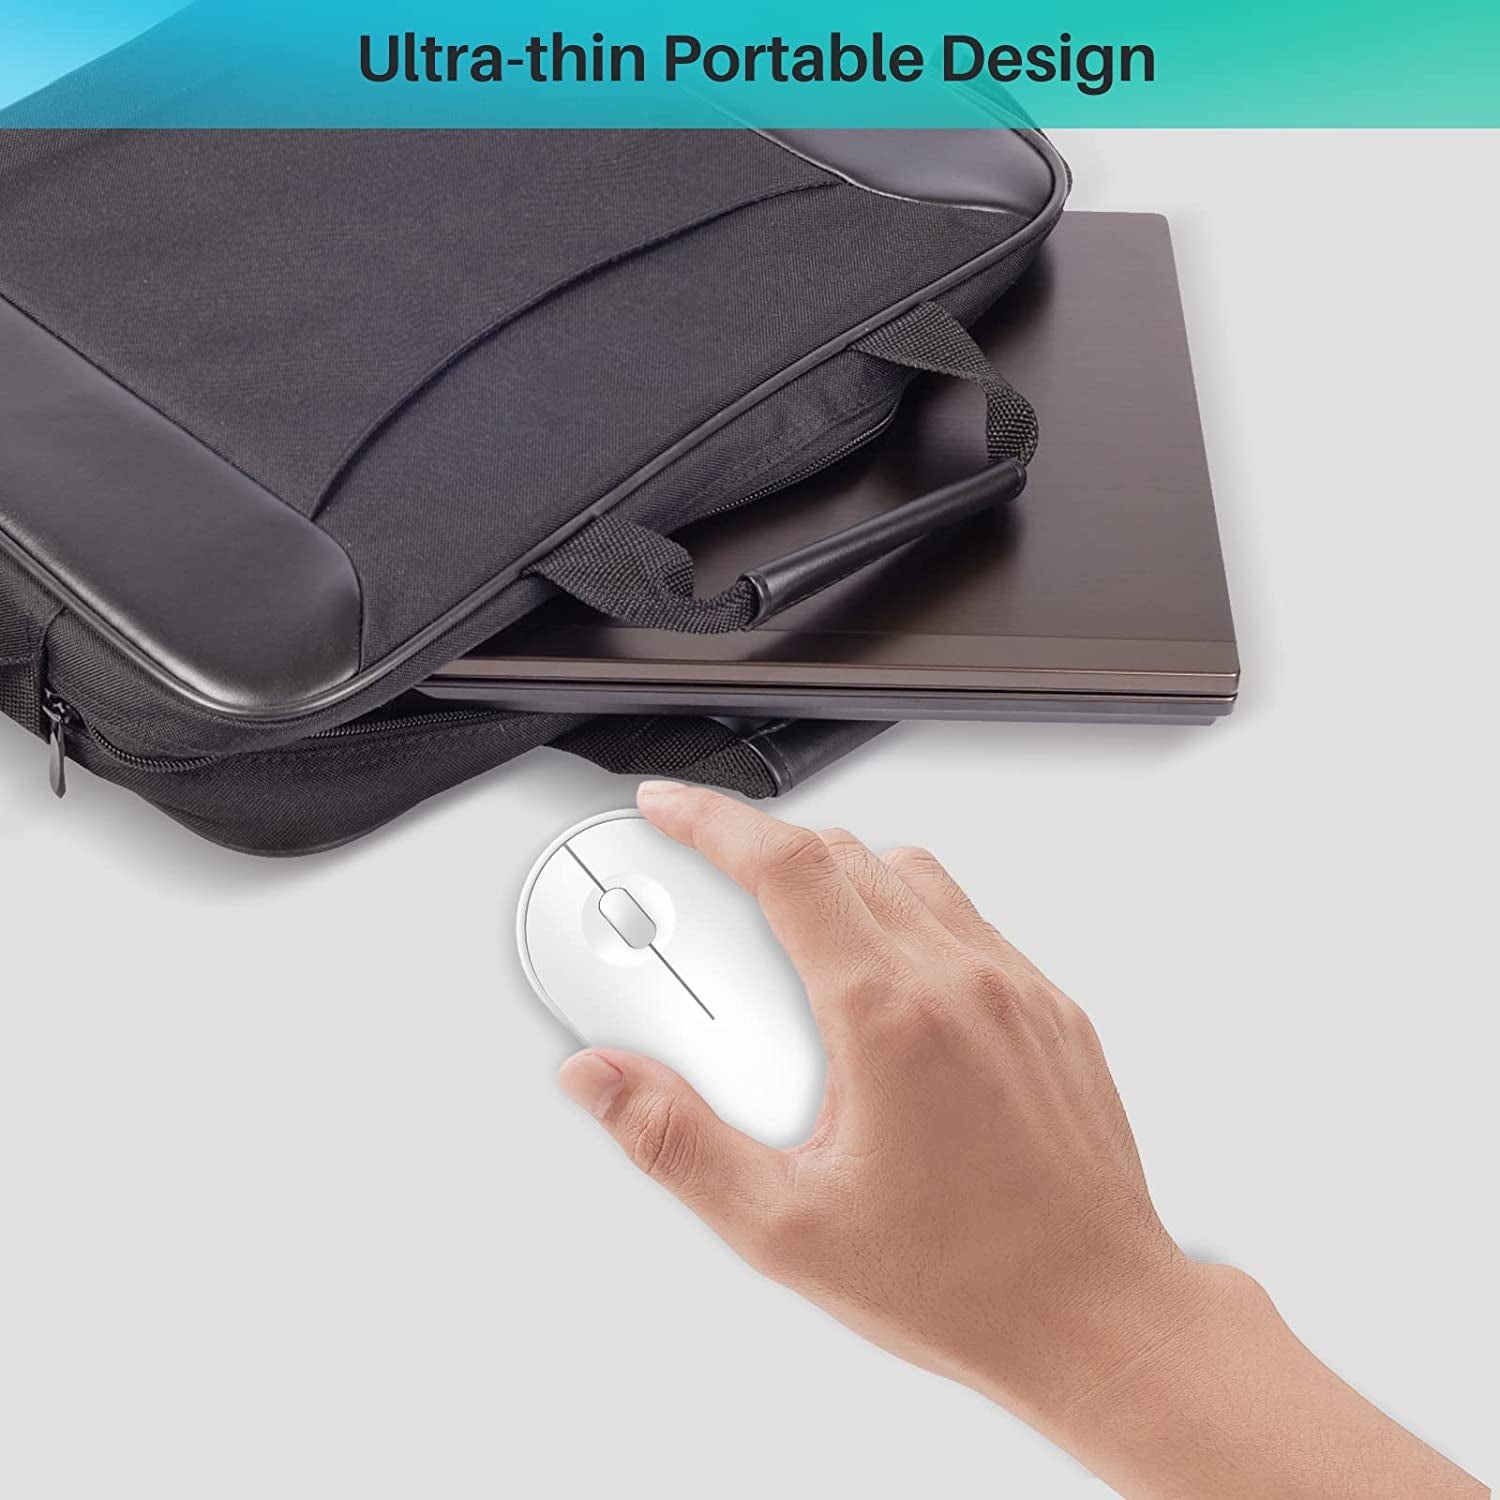 Wireless Mouse with USB 